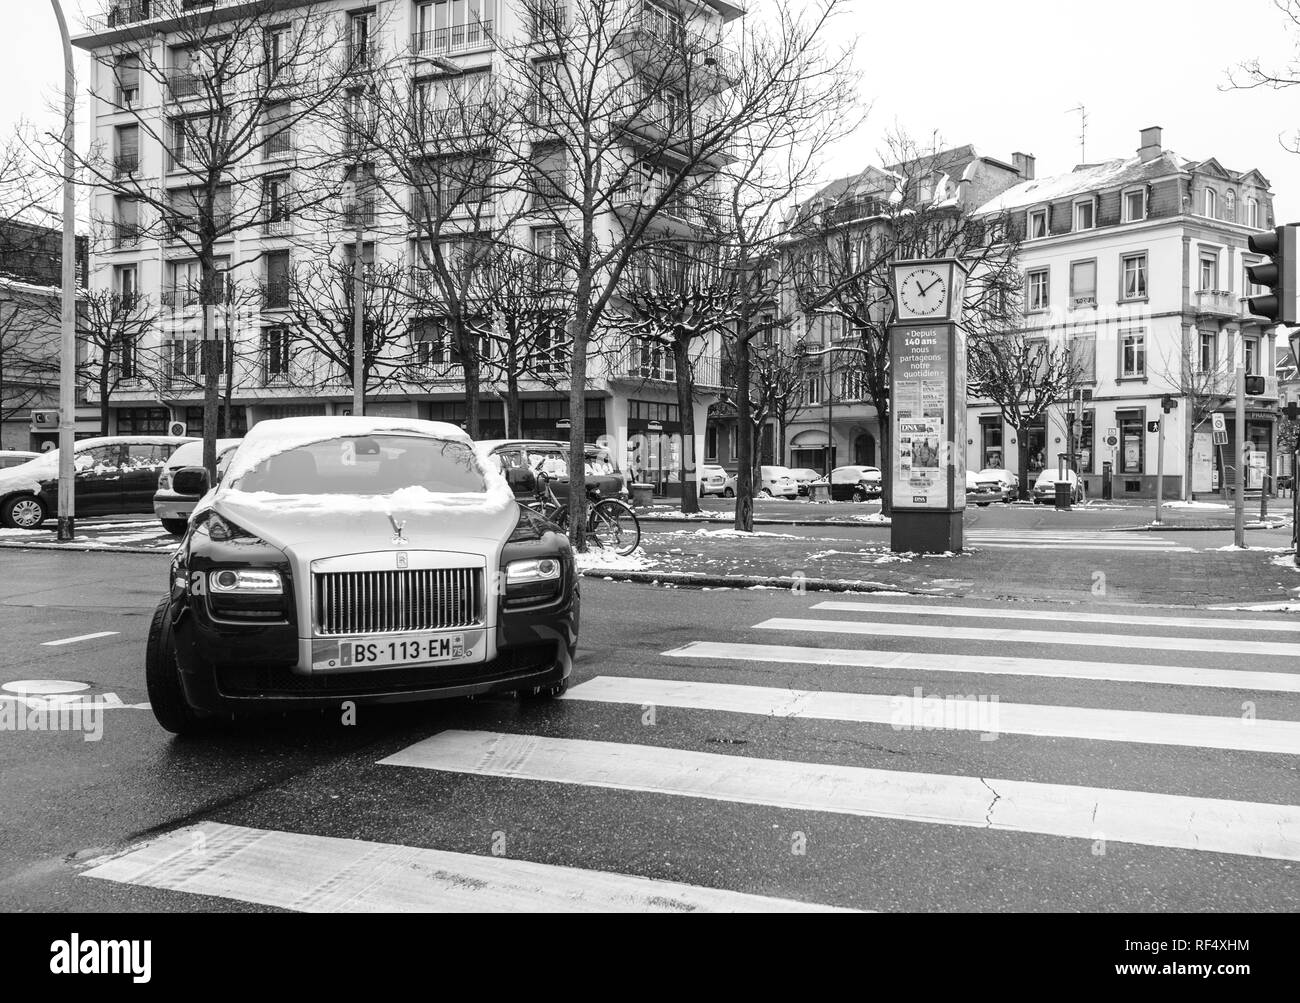 STRASBOURG, FRANCE - MAR 18, 2018: New Luxury Rolls-Royce limousine black silver car on French Allee de la Robertsau preparing to enter parking on a snowy day - black and white Stock Photo